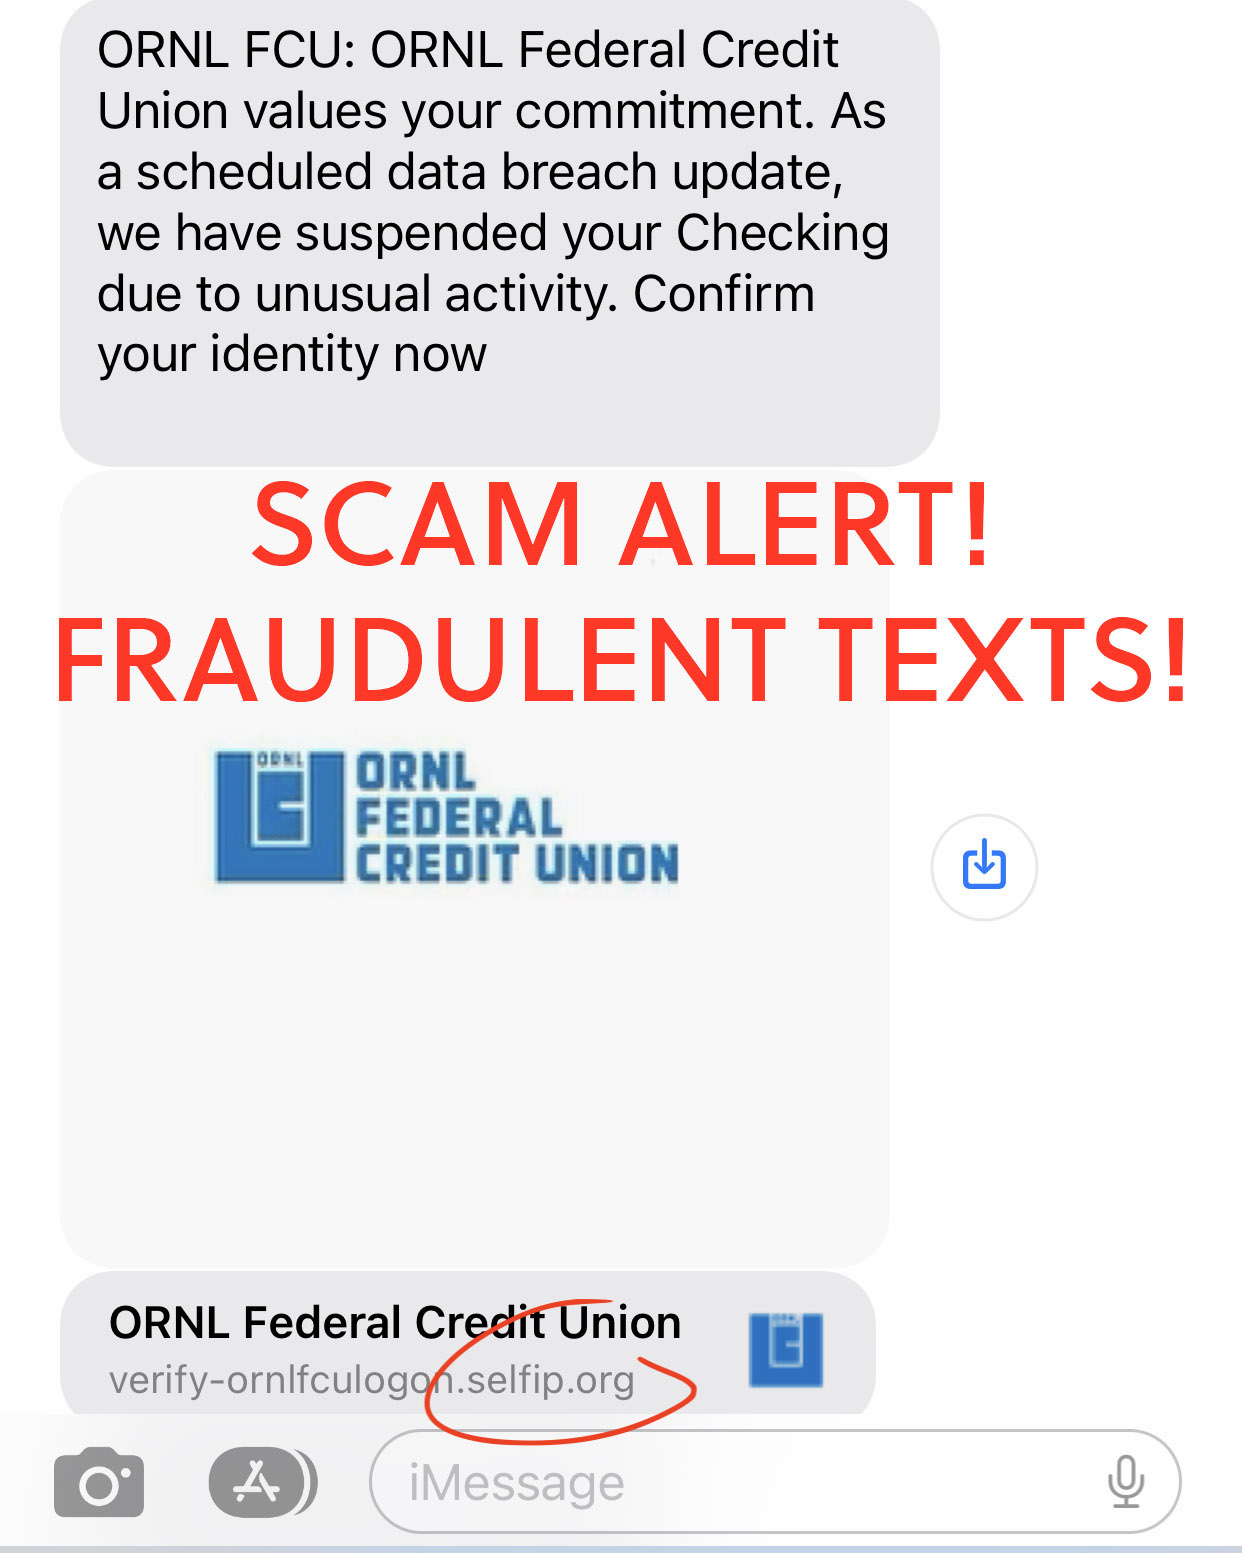 Scam Alerts and Fraudulent Text Alerts